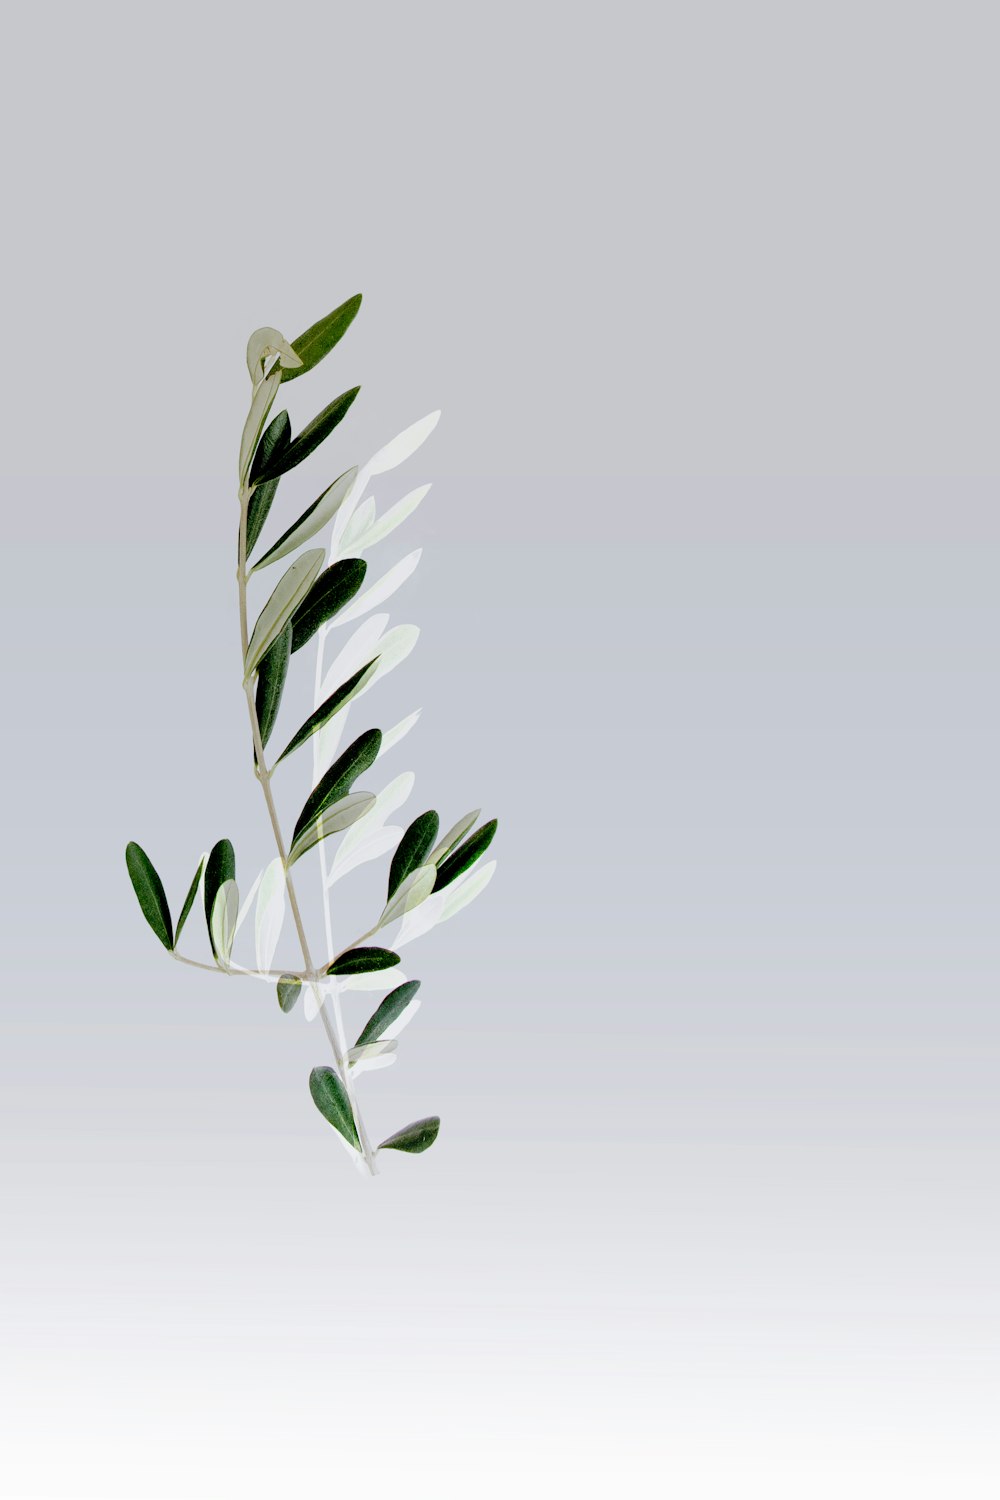 a white plant with green leaves on a gray background